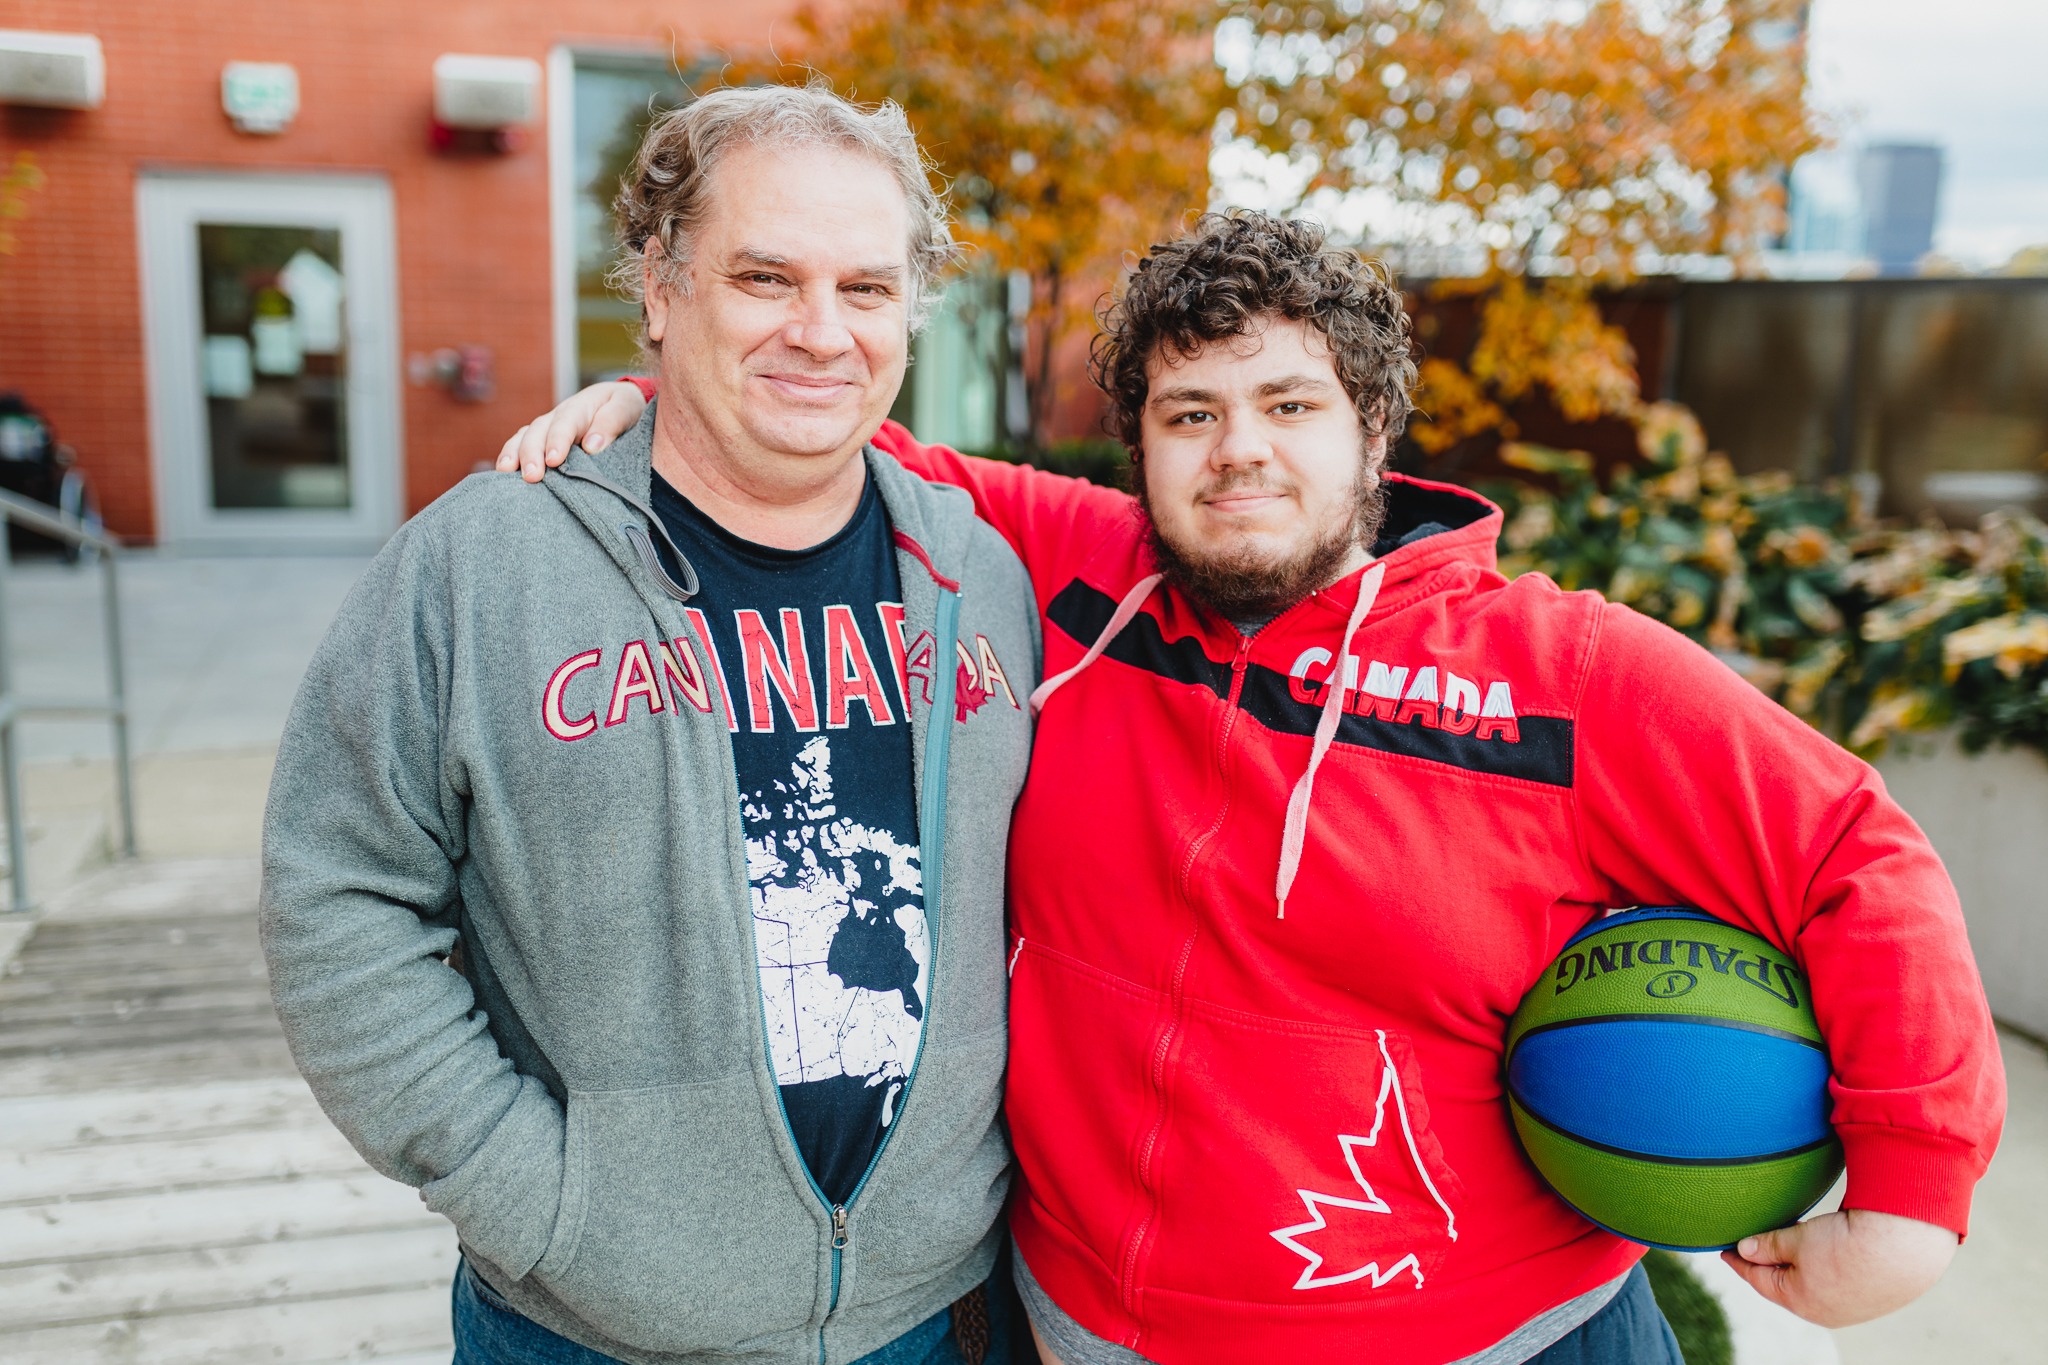 Daniel holding a basketball posing with his dad